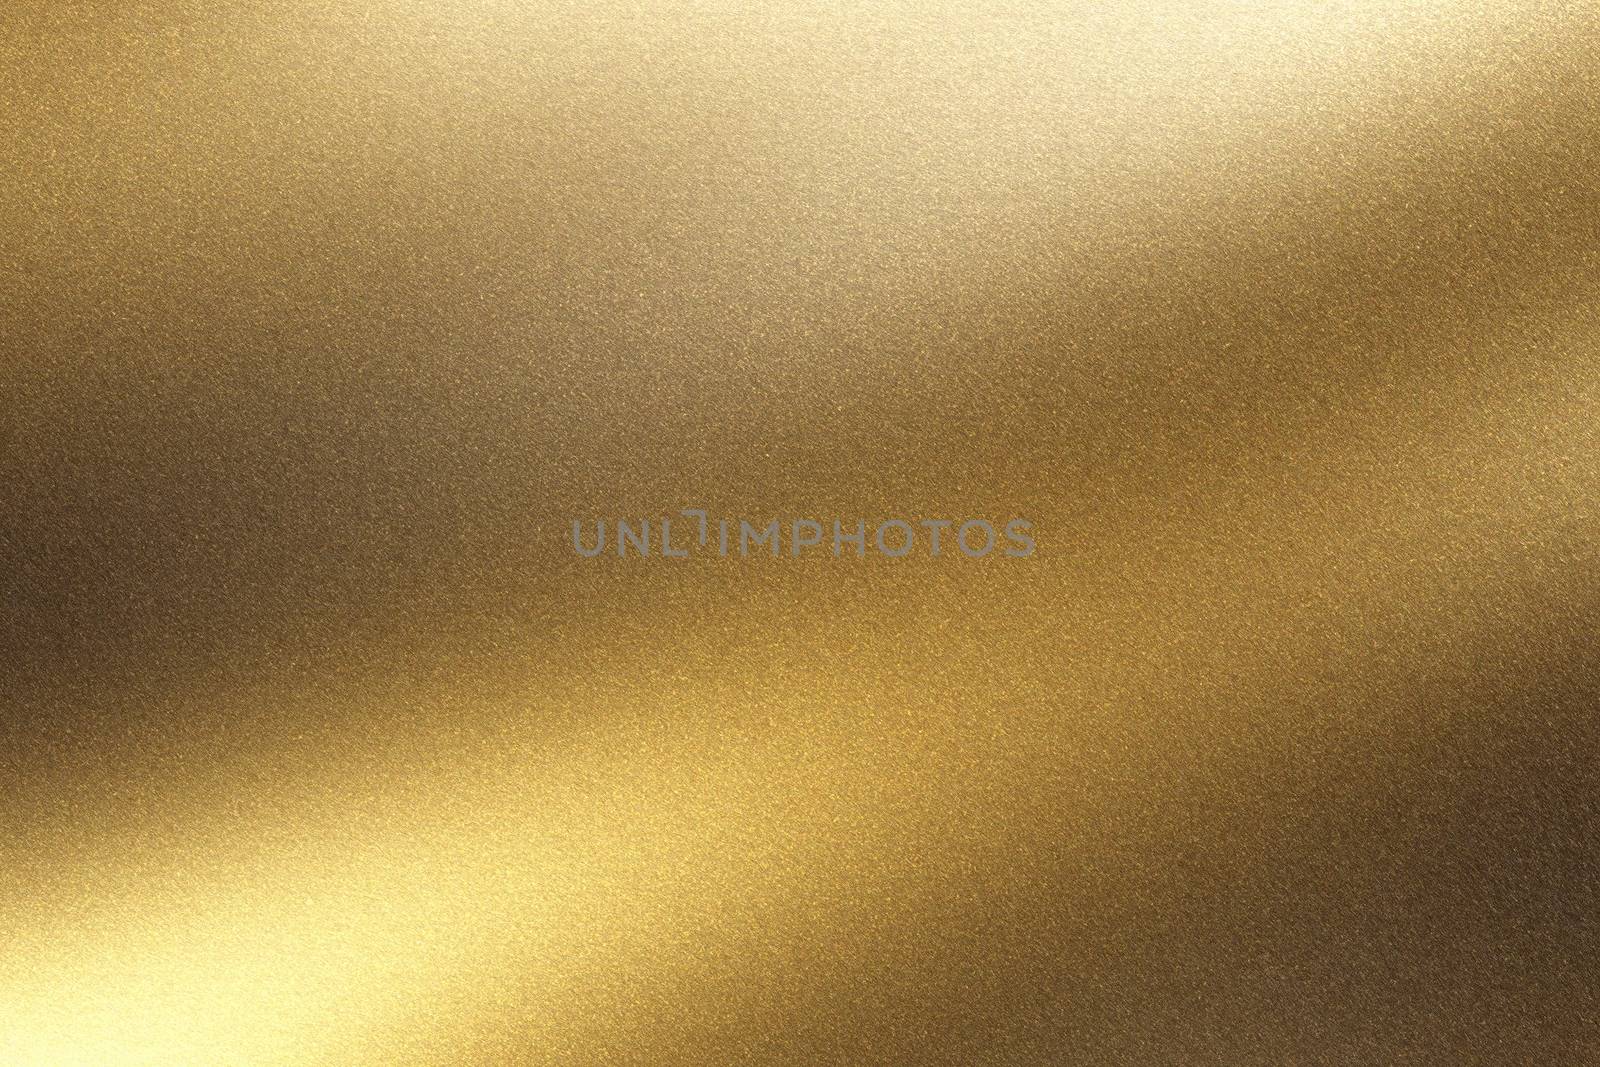 Glowing brushed gold metal wall surface, abstract texture background